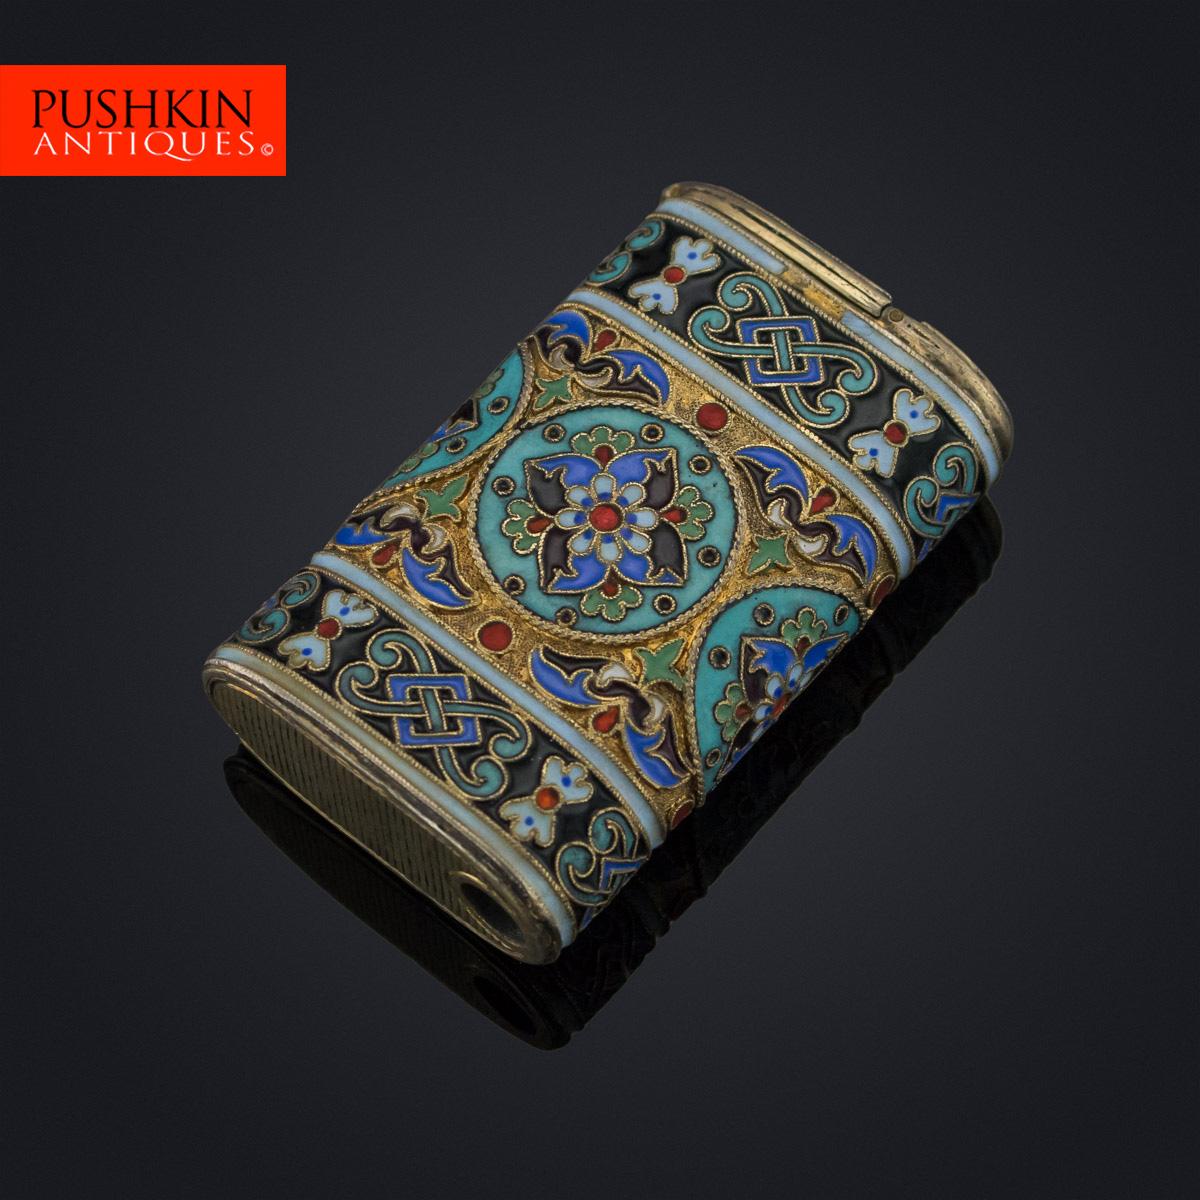 Description

Antique 20th century imperial Russian solid silver-gilt and cloisonne' enamel lighter case, decorated with stylized floral motifs in pastel enamels on a matted gilt ground with light blue boarders.

Hallmarked Russian silver 84 (875